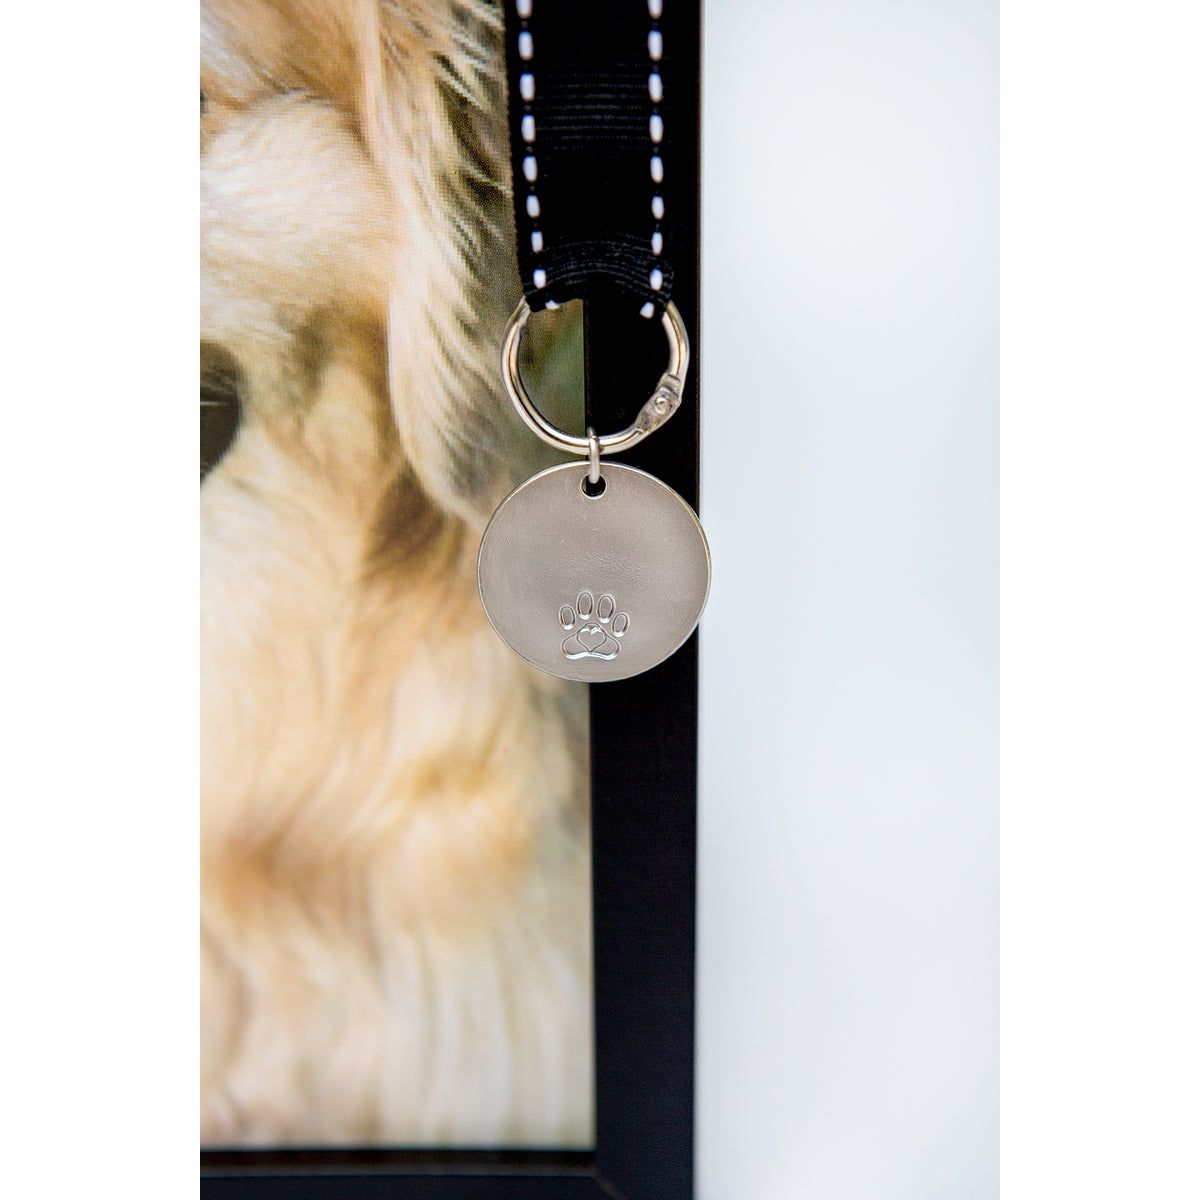 Close up of the metal tag with embossed pawprint and black grosgrain ribbon with white stitching.